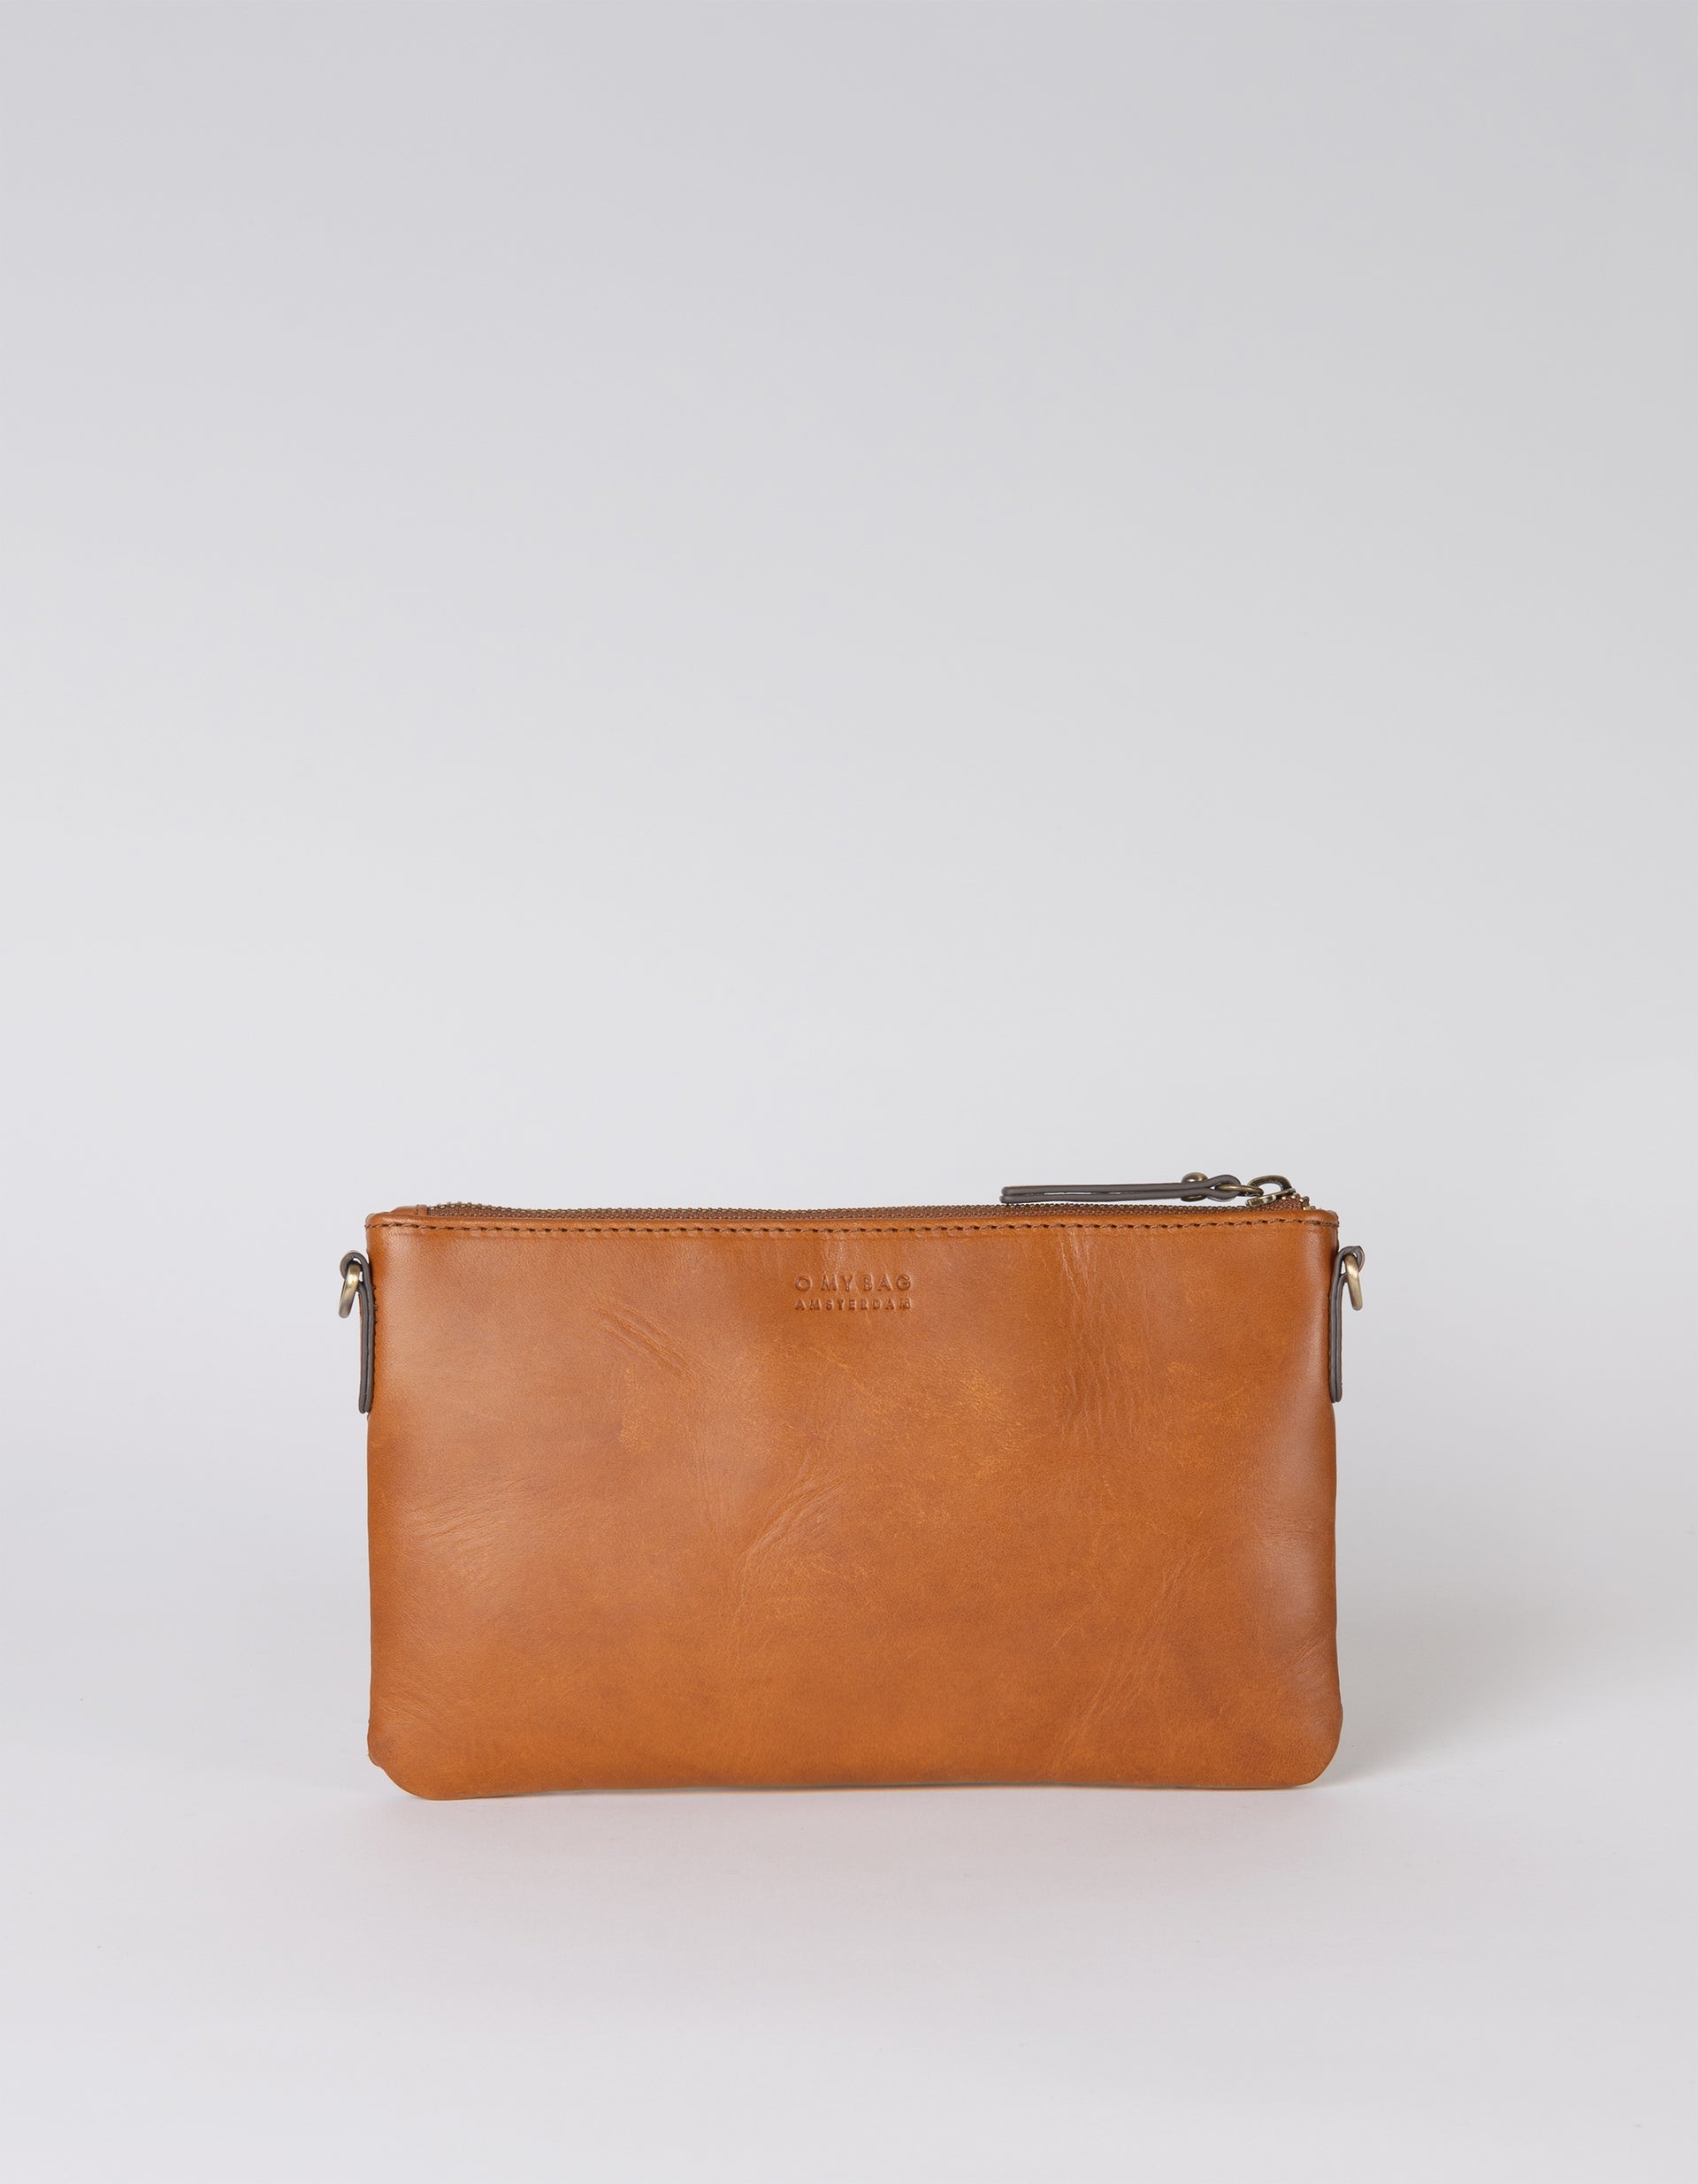 Lexi bag in cognac woven classic leather, back image